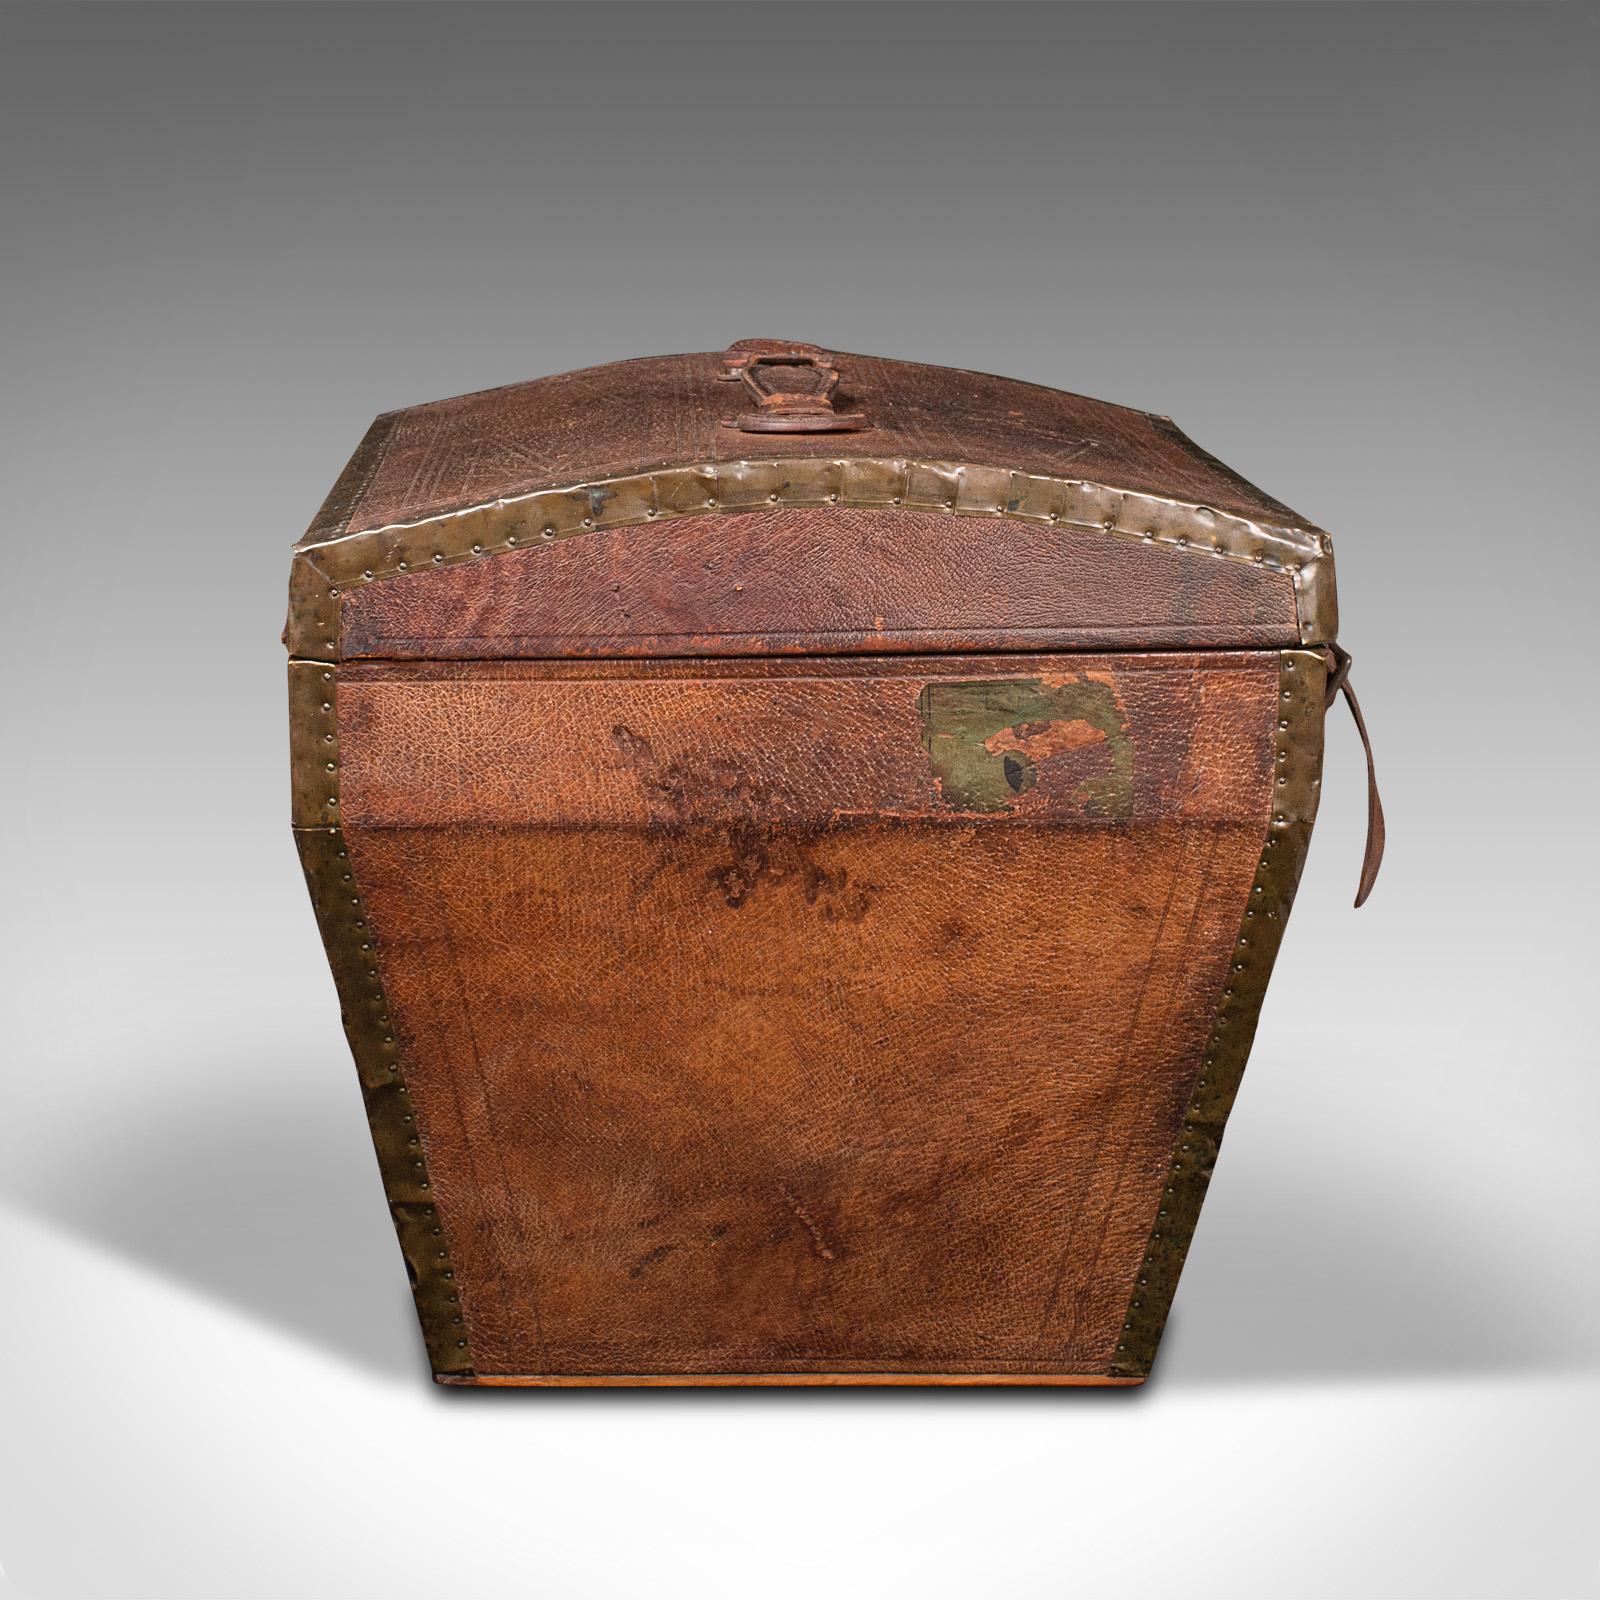 British Antique Touring Hat Box, French, Leather, Brass, Travel Case, Victorian, C.1850